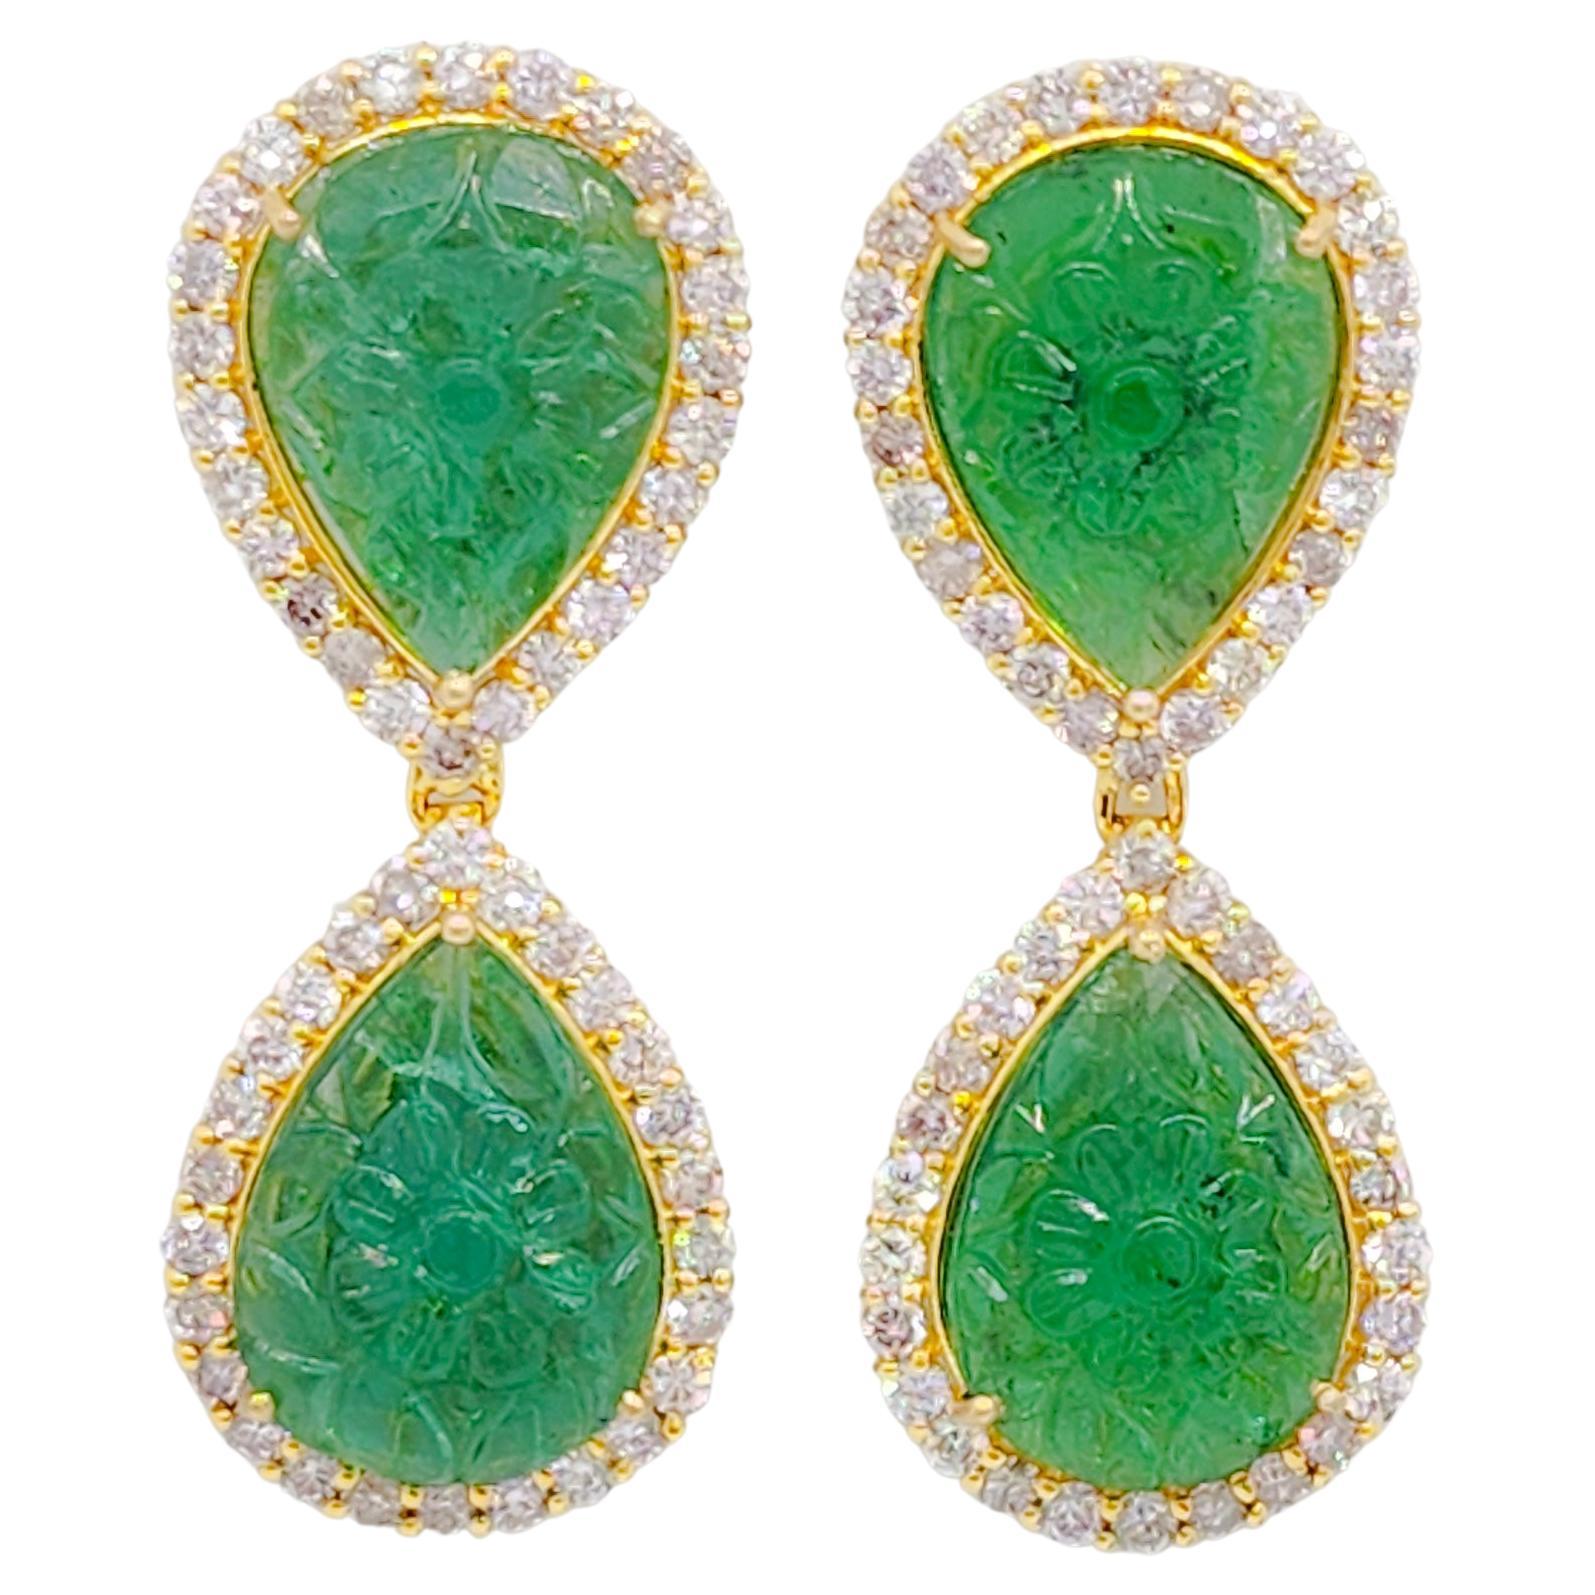 Carved Emerald and White Diamond Dangle Earrings in 18k Yellow Gold